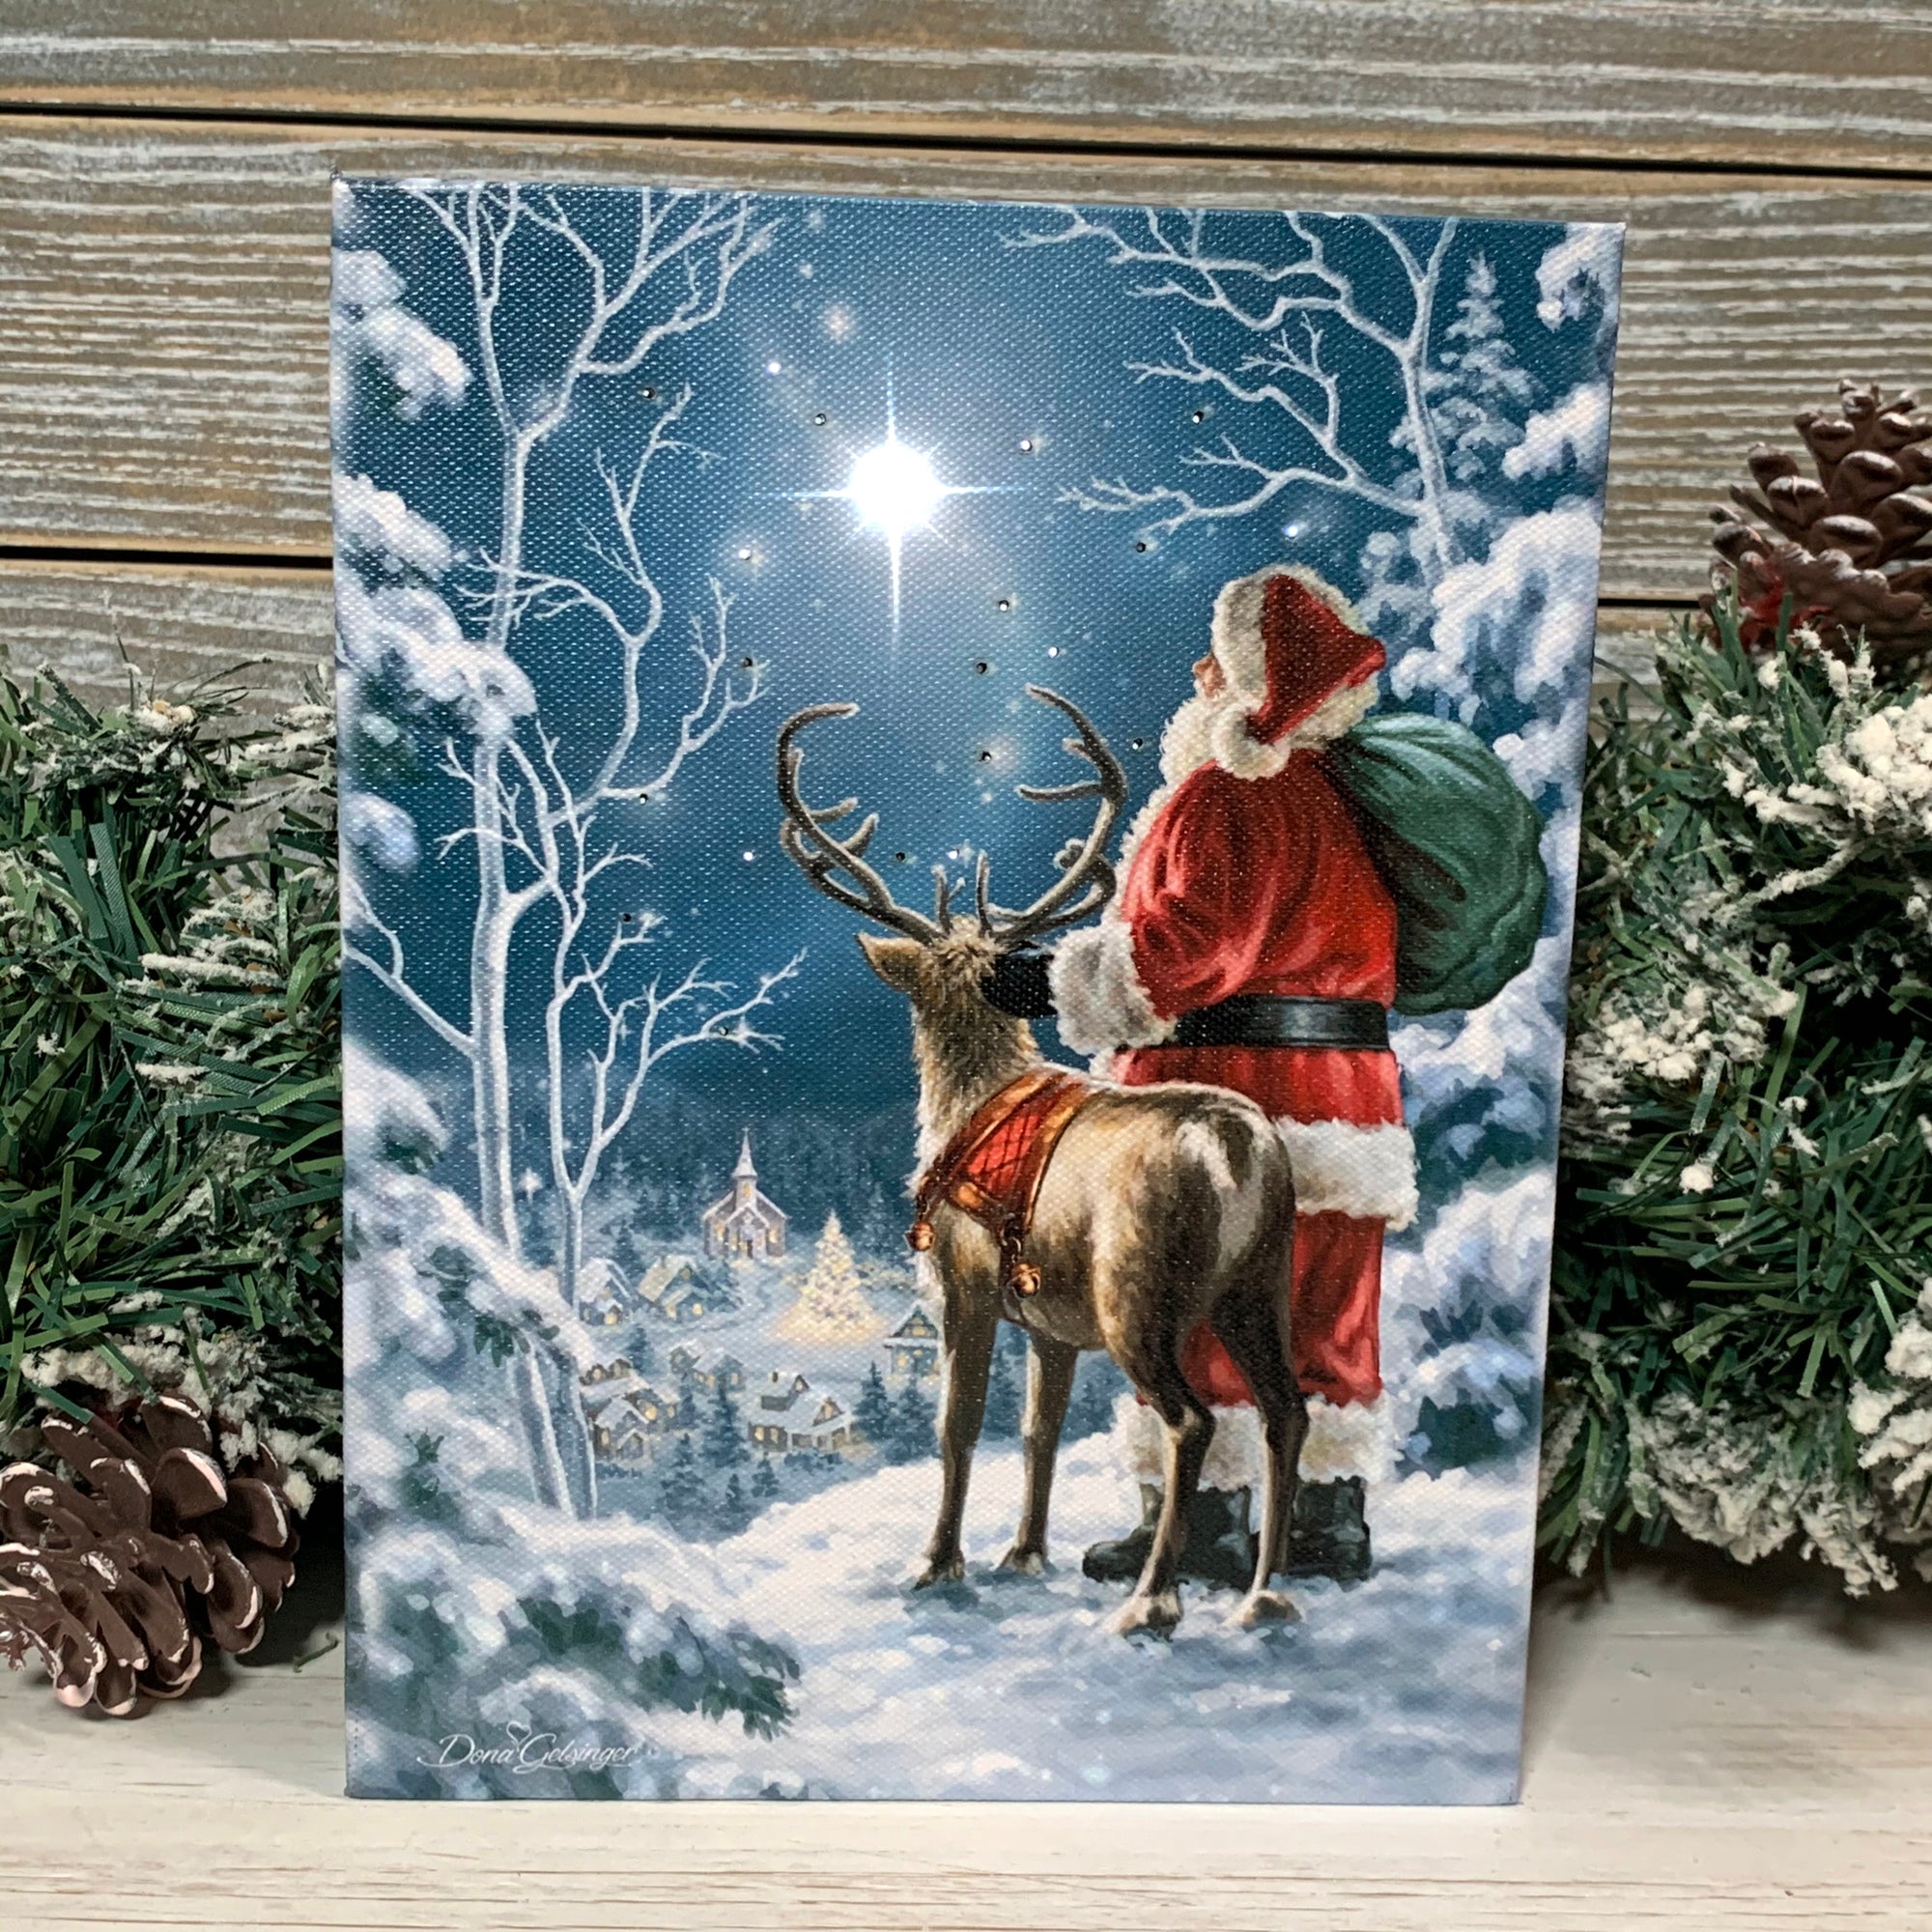 This enchanting canvas captures the essence of Christmas as Santa, dressed in his iconic red suit, holds his sack of presents alongside one of his trusty reindeer.  Beneath them lies a picturesque snow-covered town, eagerly awaiting the arrival of Santa and his gifts. And high above, a bright star shines down.